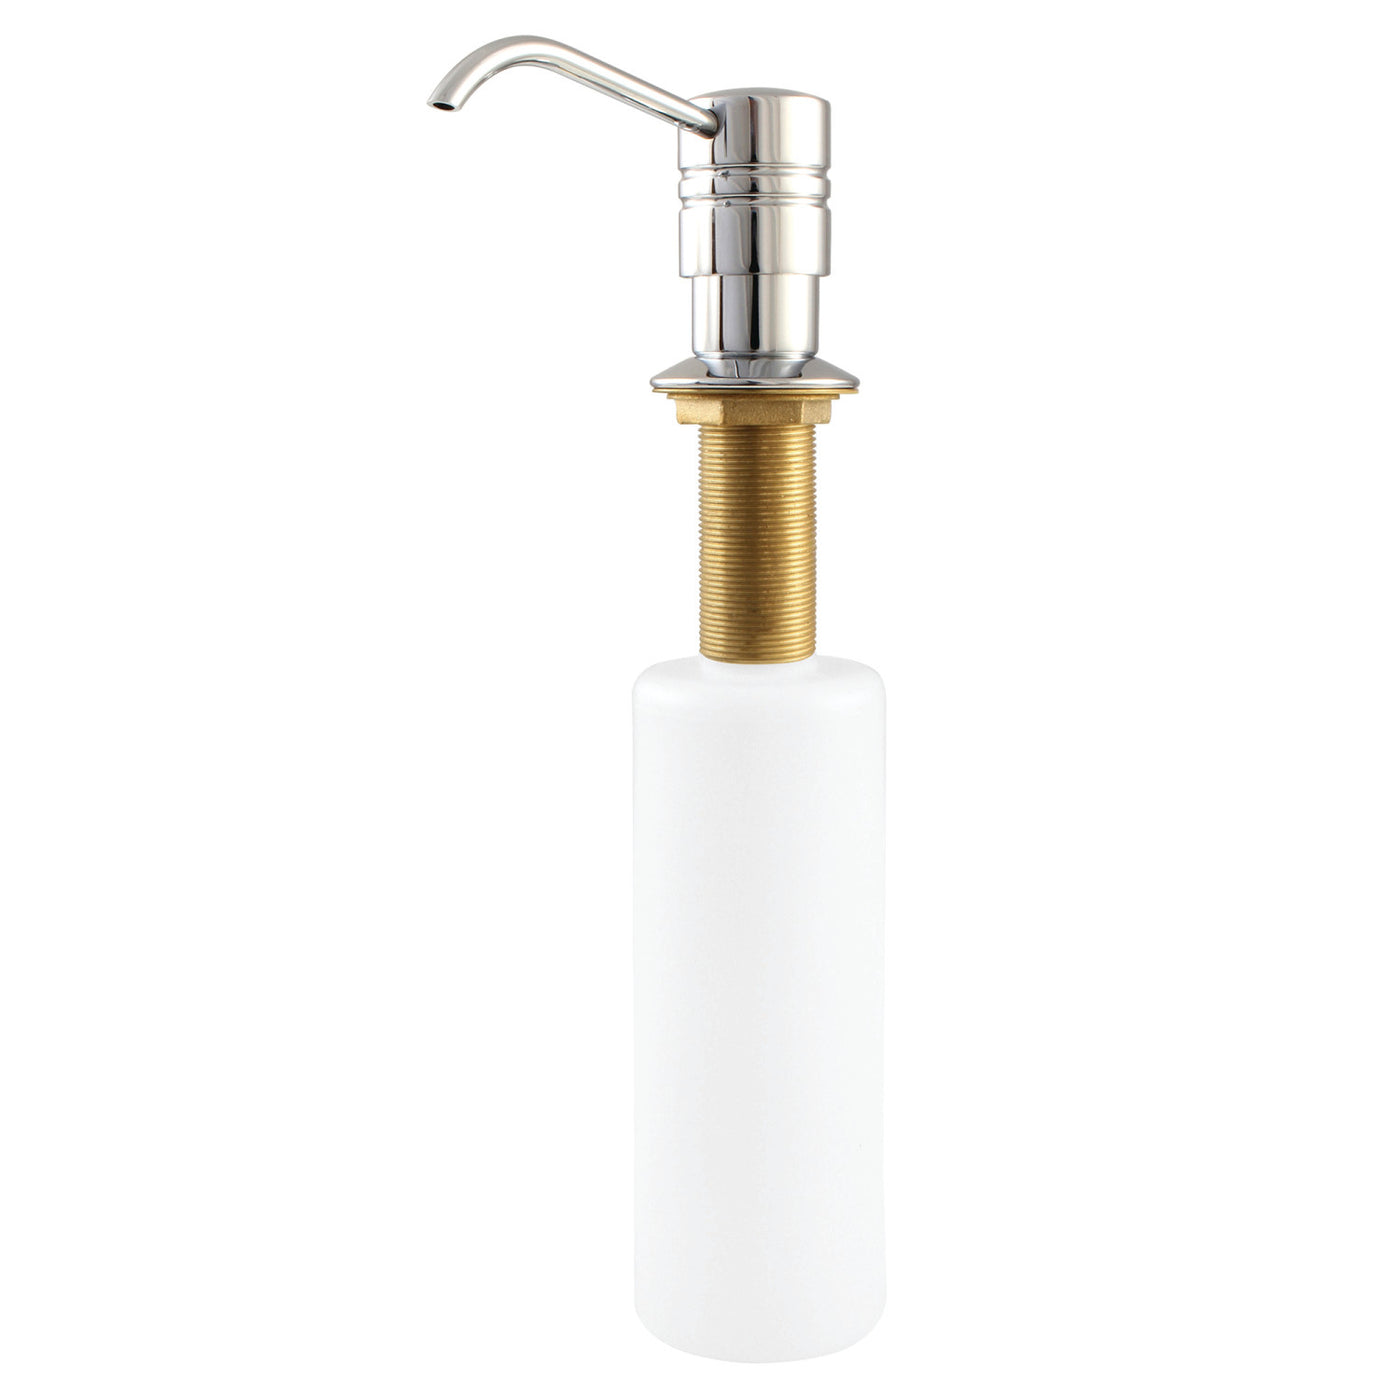 Elements of Design ESD2611 Straight Nozzle Metal Soap Dispenser, Polished Chrome